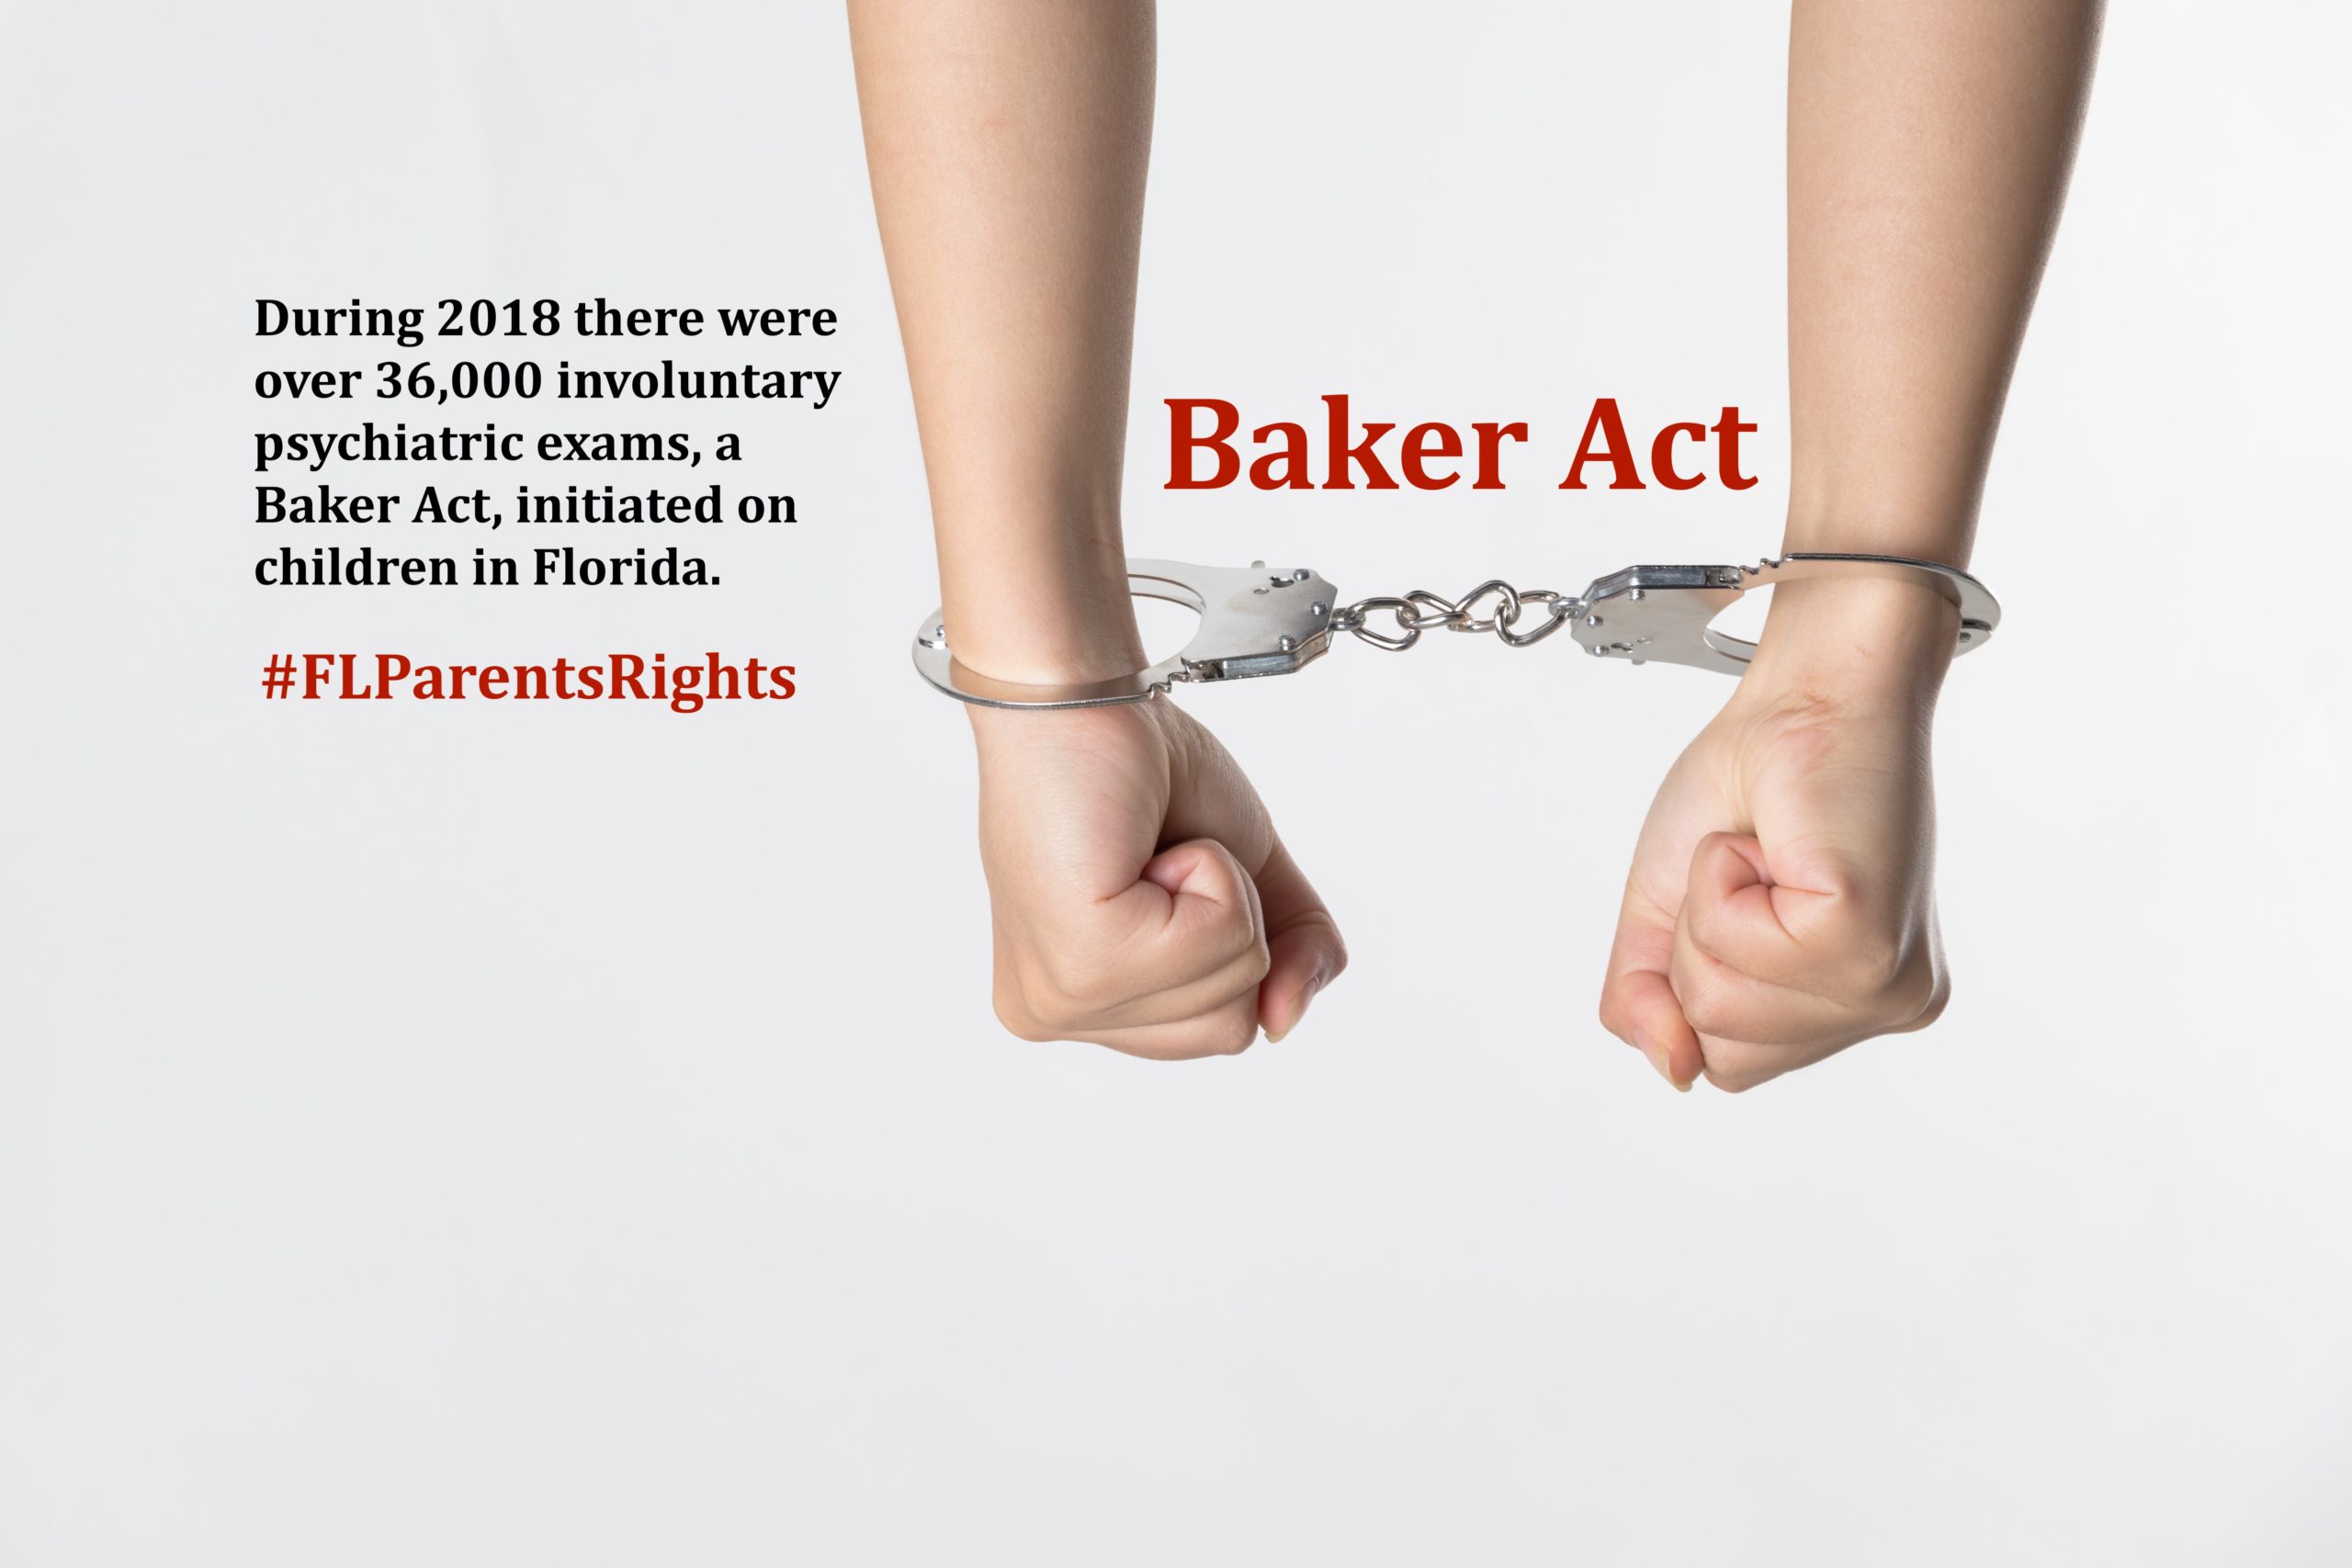 The fundamental right of a parent to help their child is being ignored despite the fact that there is an existing provision for the parent to be given an opportunity to help their child as part of the Baker Act law.